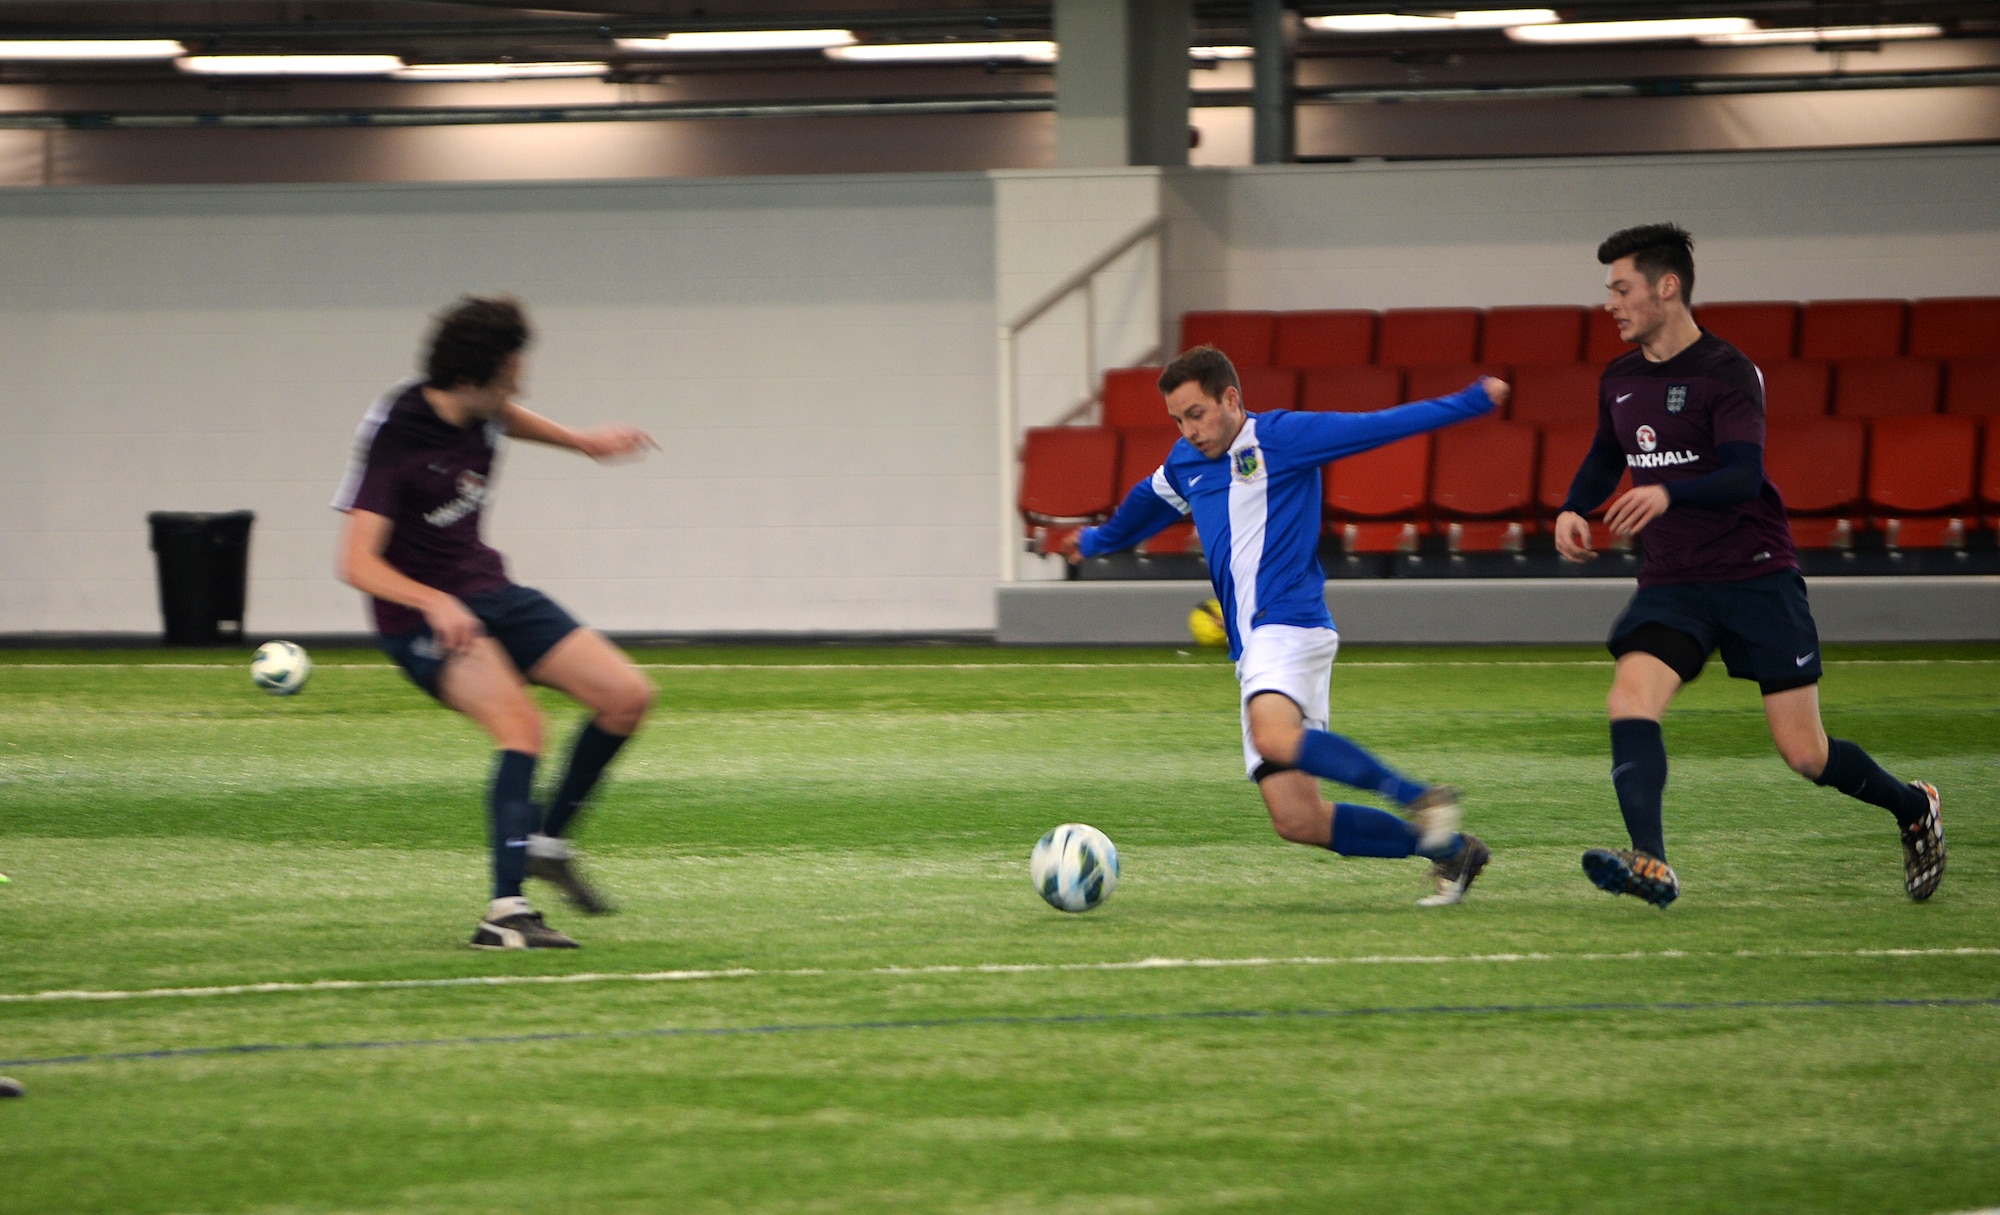 Airman 1st Class Justin Howard, a defender for the Liberty Football Club, prepares to pass the ball to a teammate during a match against the world-ranked England Cerebral Palsy team at St. George’s Park, England, Jan. 25, 2015. This match highlighted the continued cooperation and relationship between the U.K. and the U.S. (U.S. Air Force photo by Staff Sgt. Emerson Nuñez/Released)